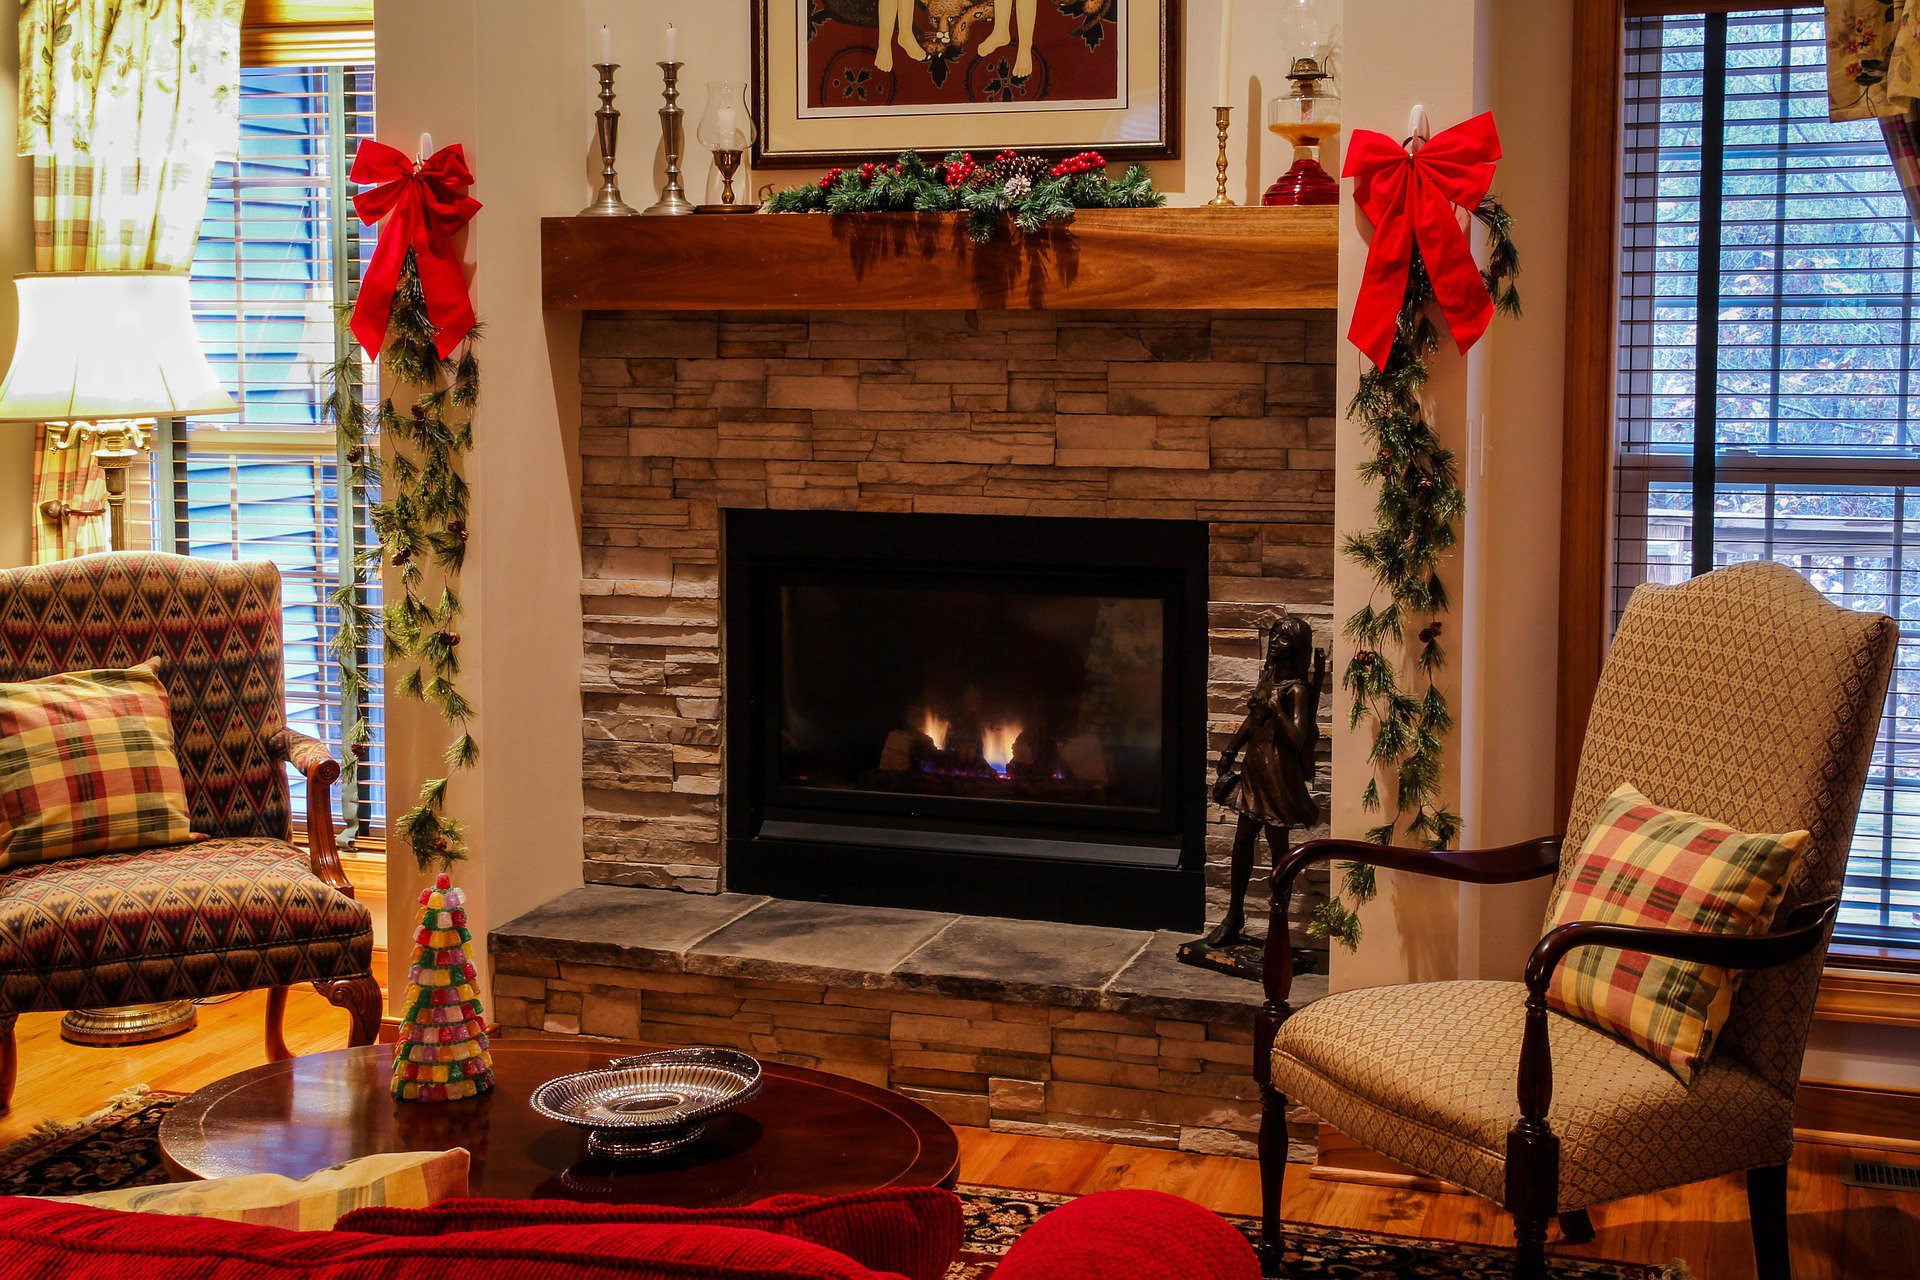 Can You Add A Mantel To A Brick Fireplace?